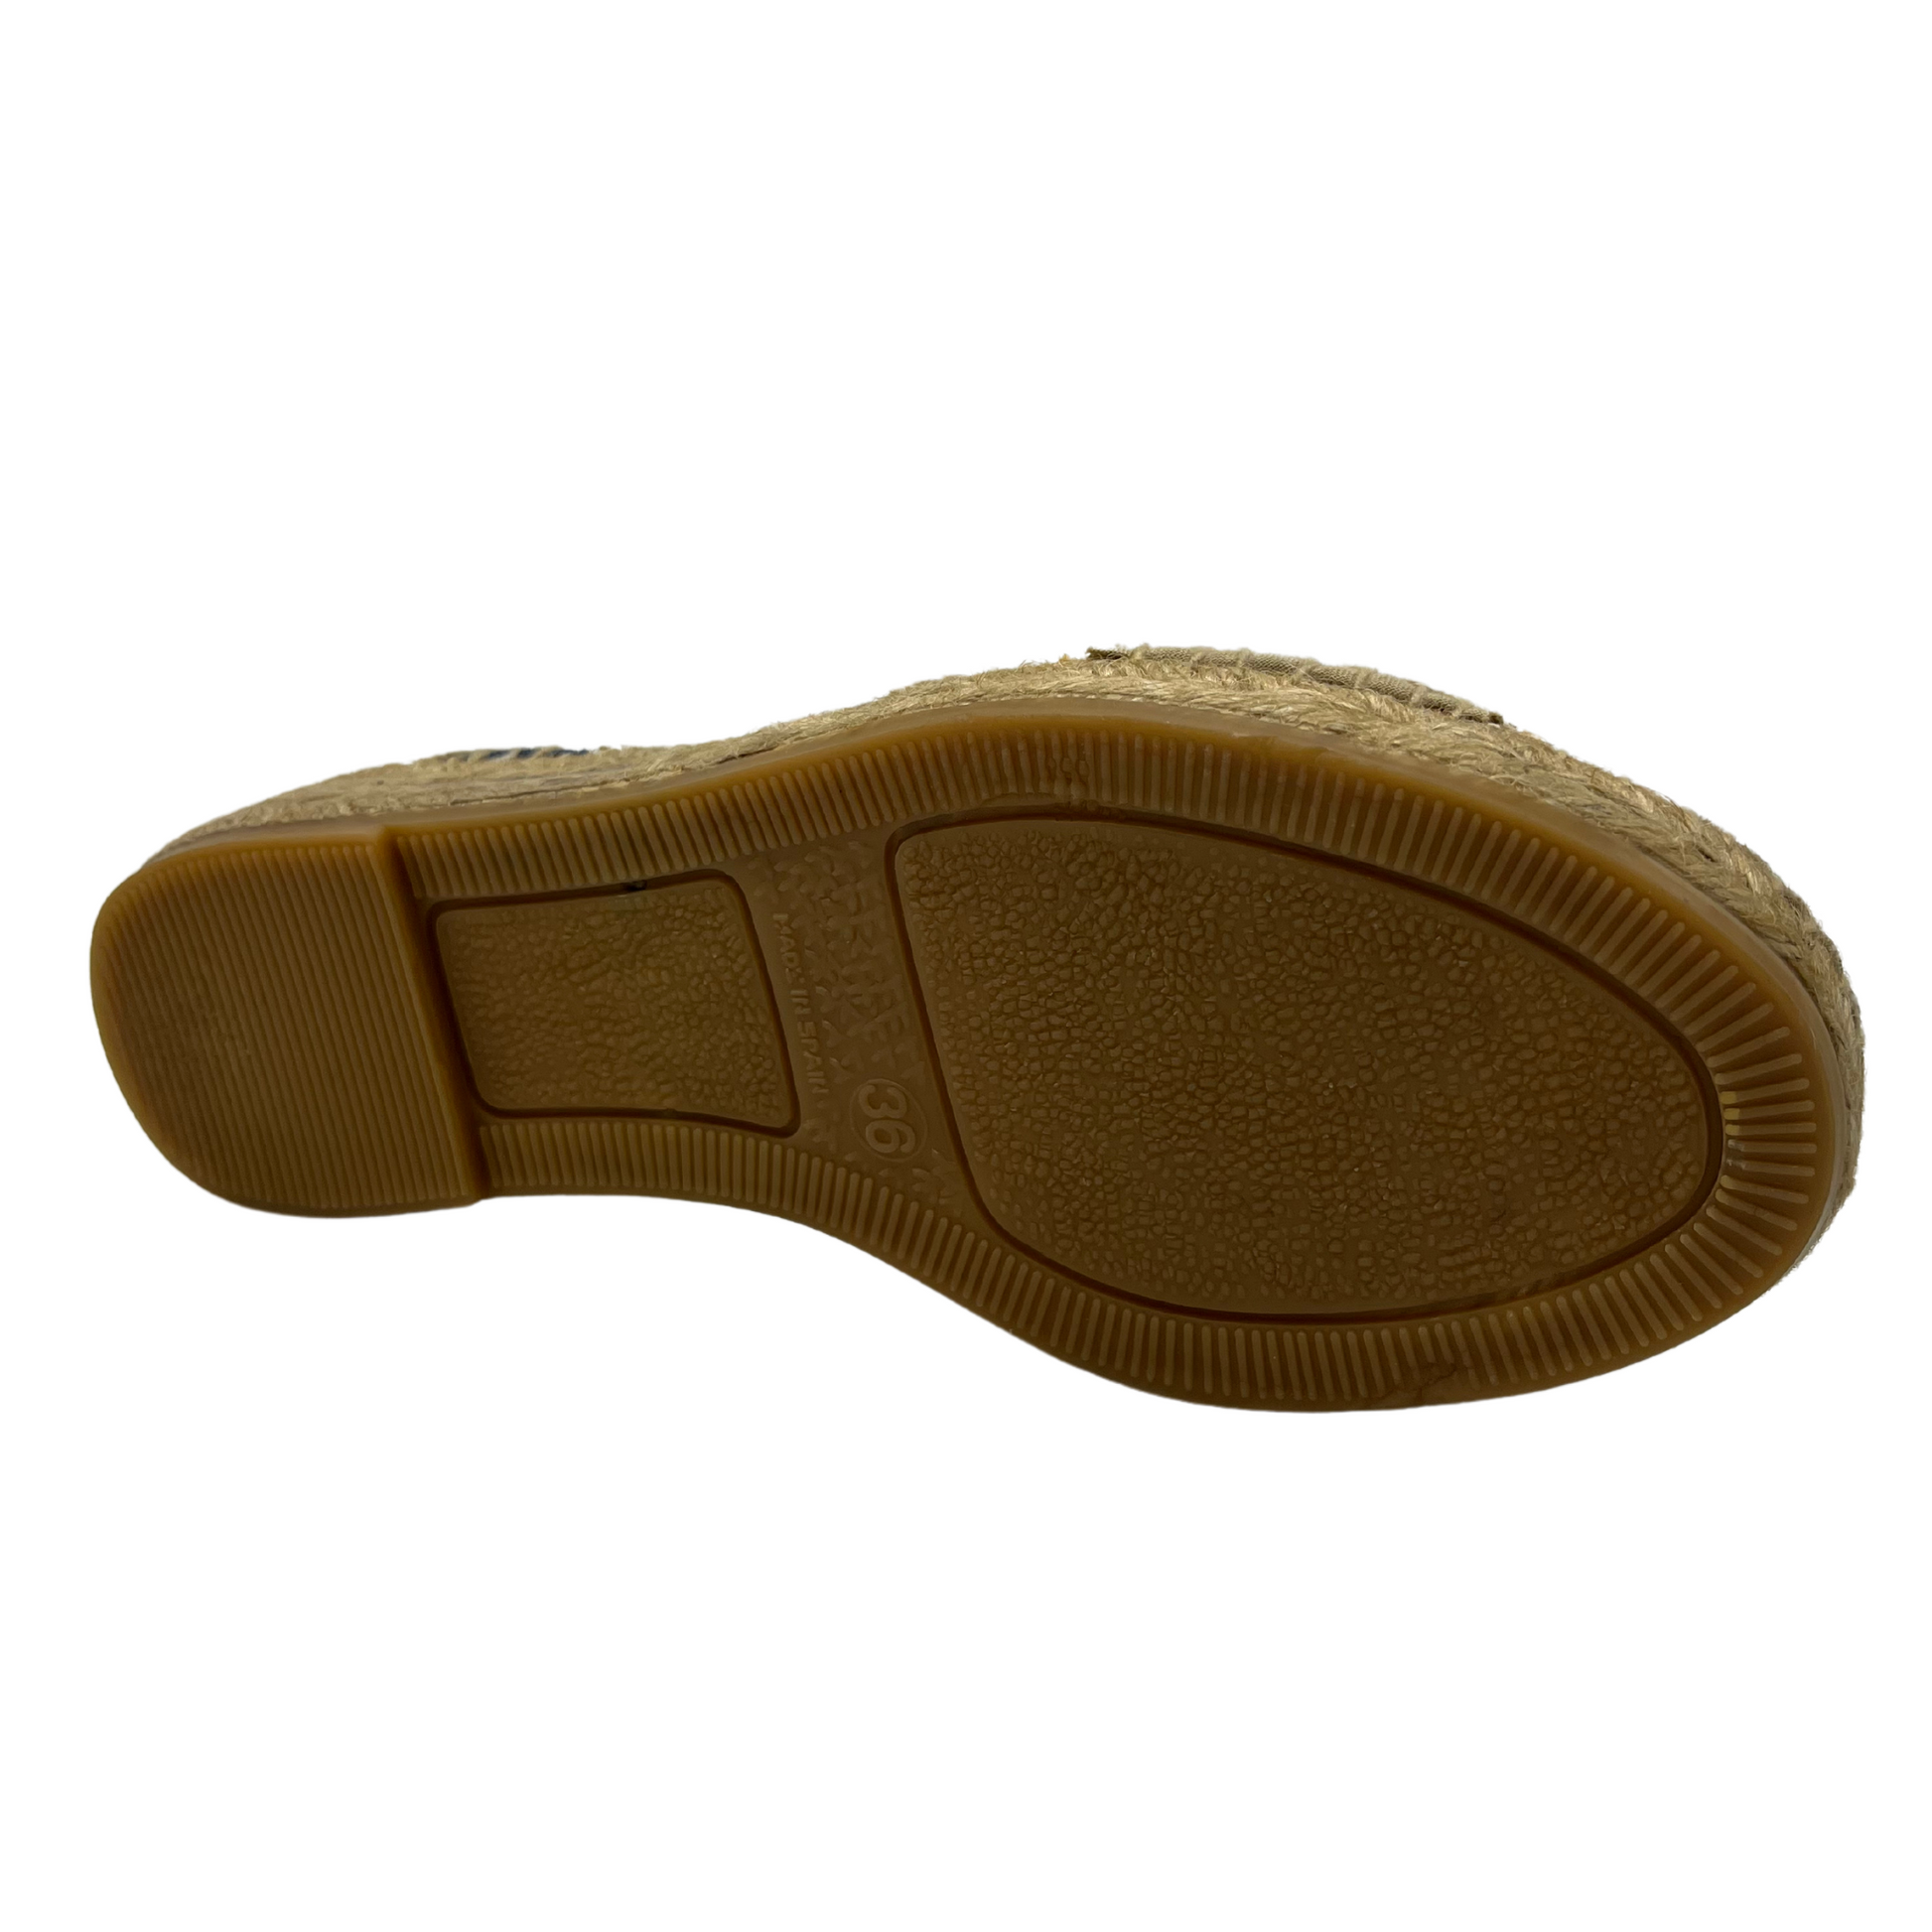 Bottom view of women's espadrille with non-slip rubber bottom and hand stitched details.